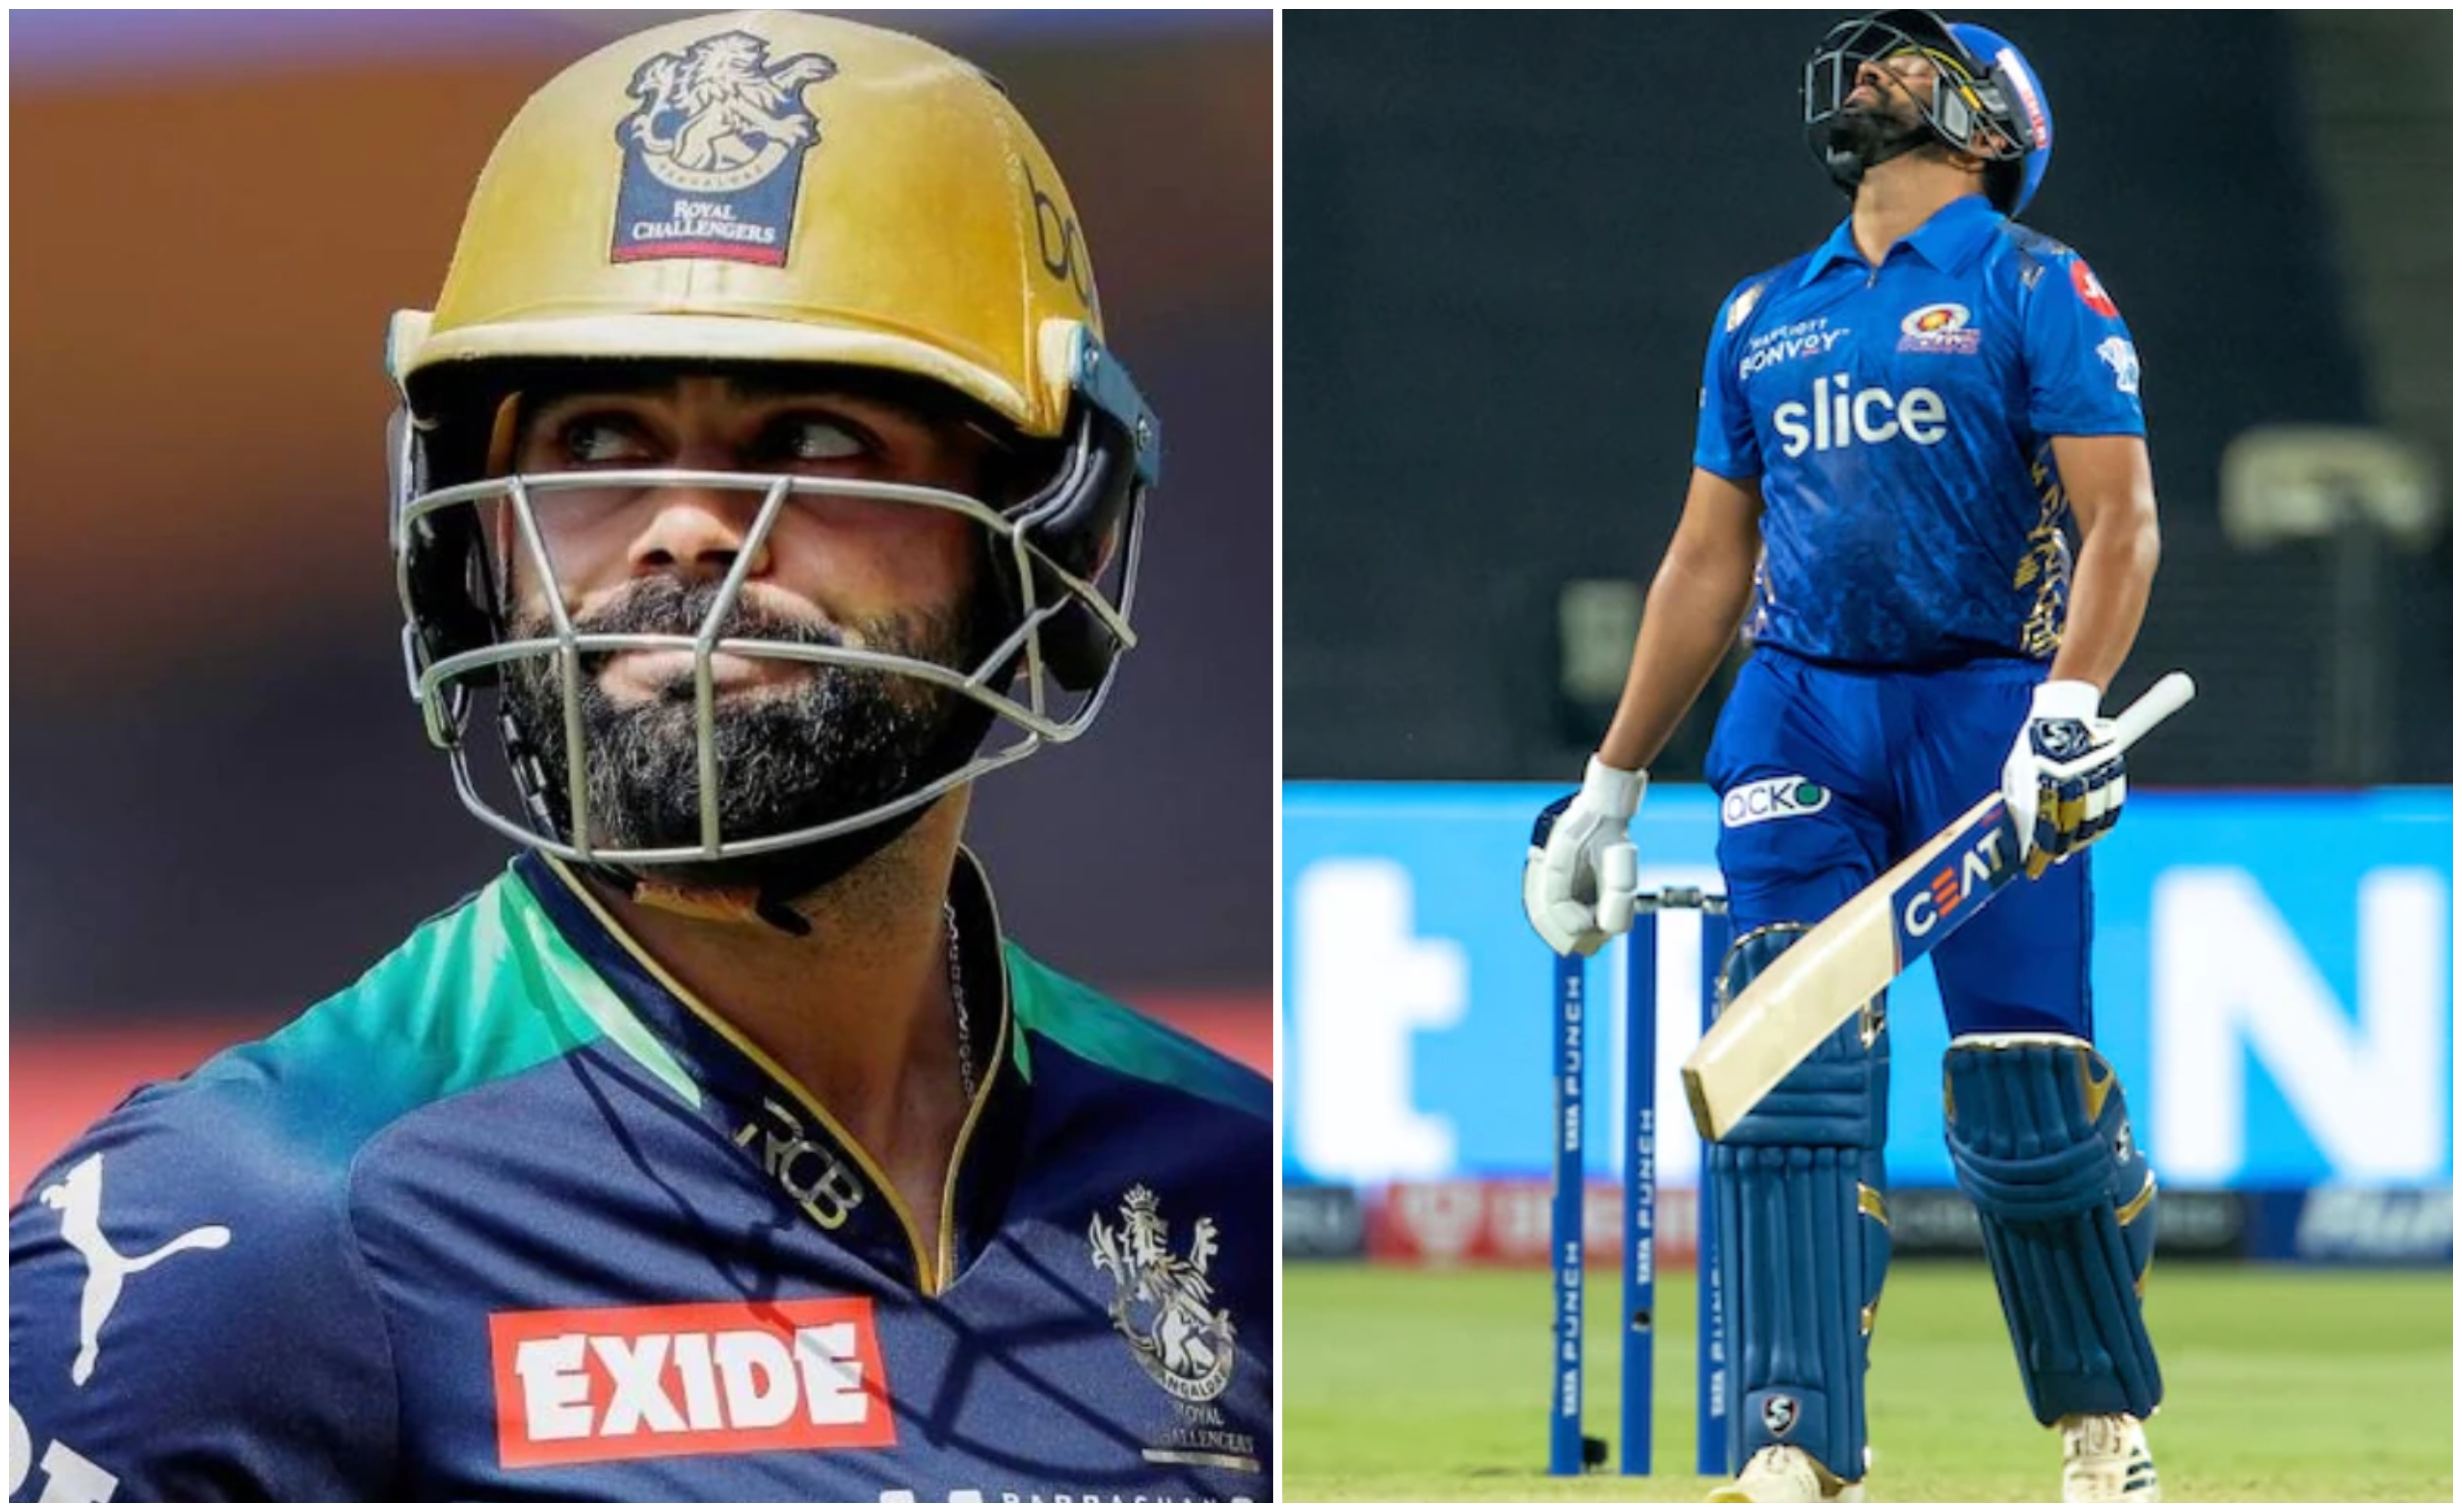 Virat Kohli and Rohit Sharma are struggling for runs in the ongoing IPL | BCCI/IPL